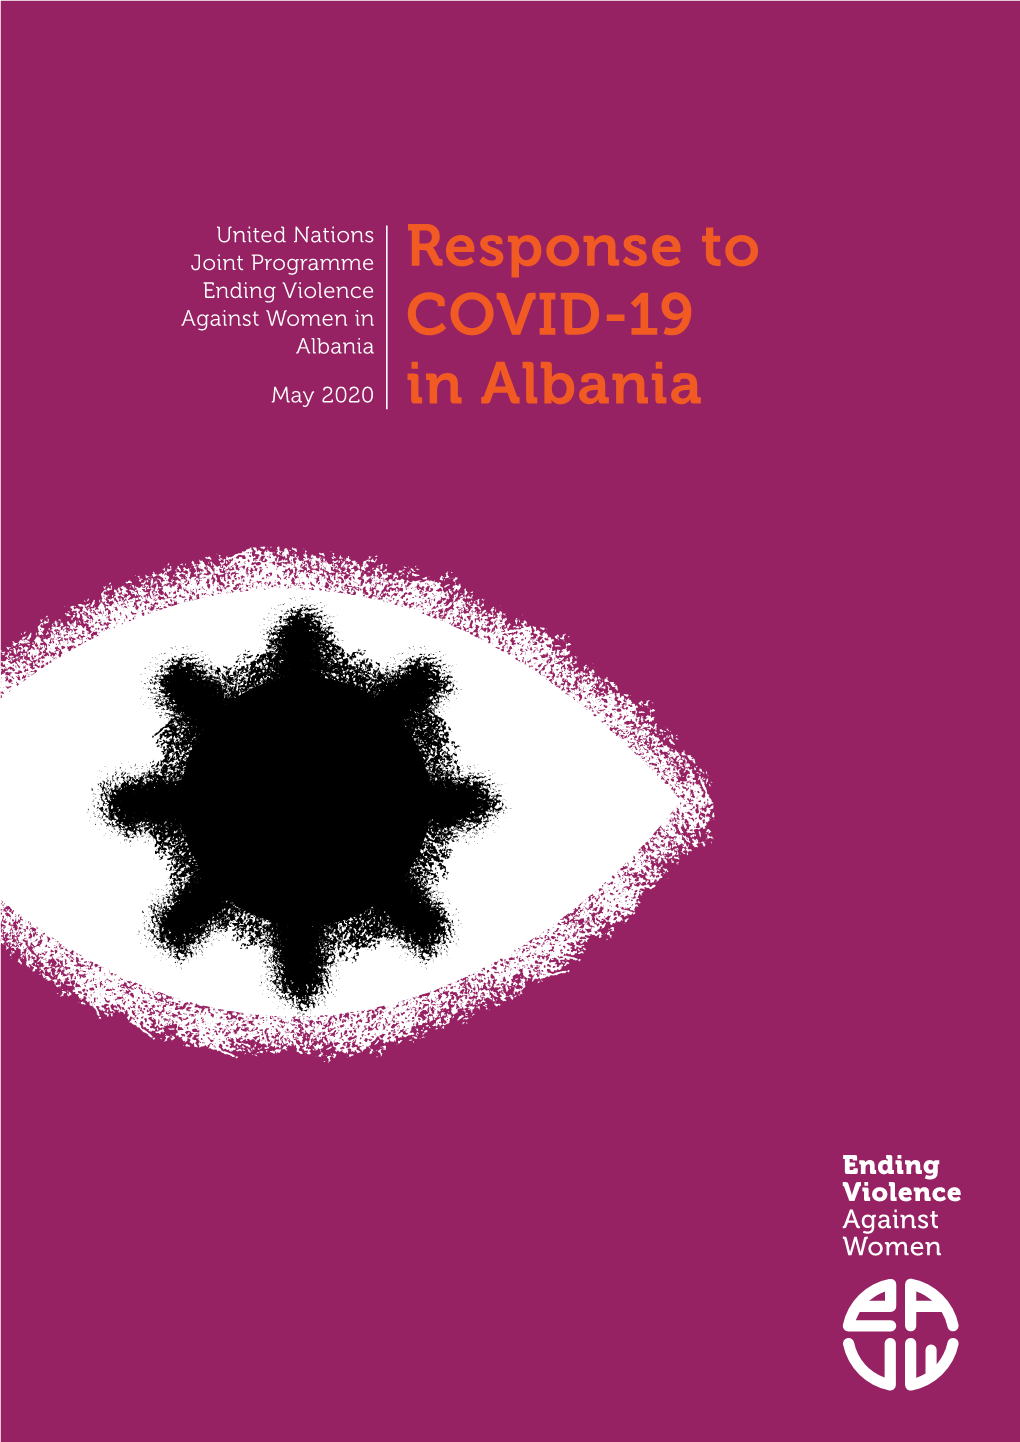 Ending Violence Against Women in Albania: Response to COVID-19